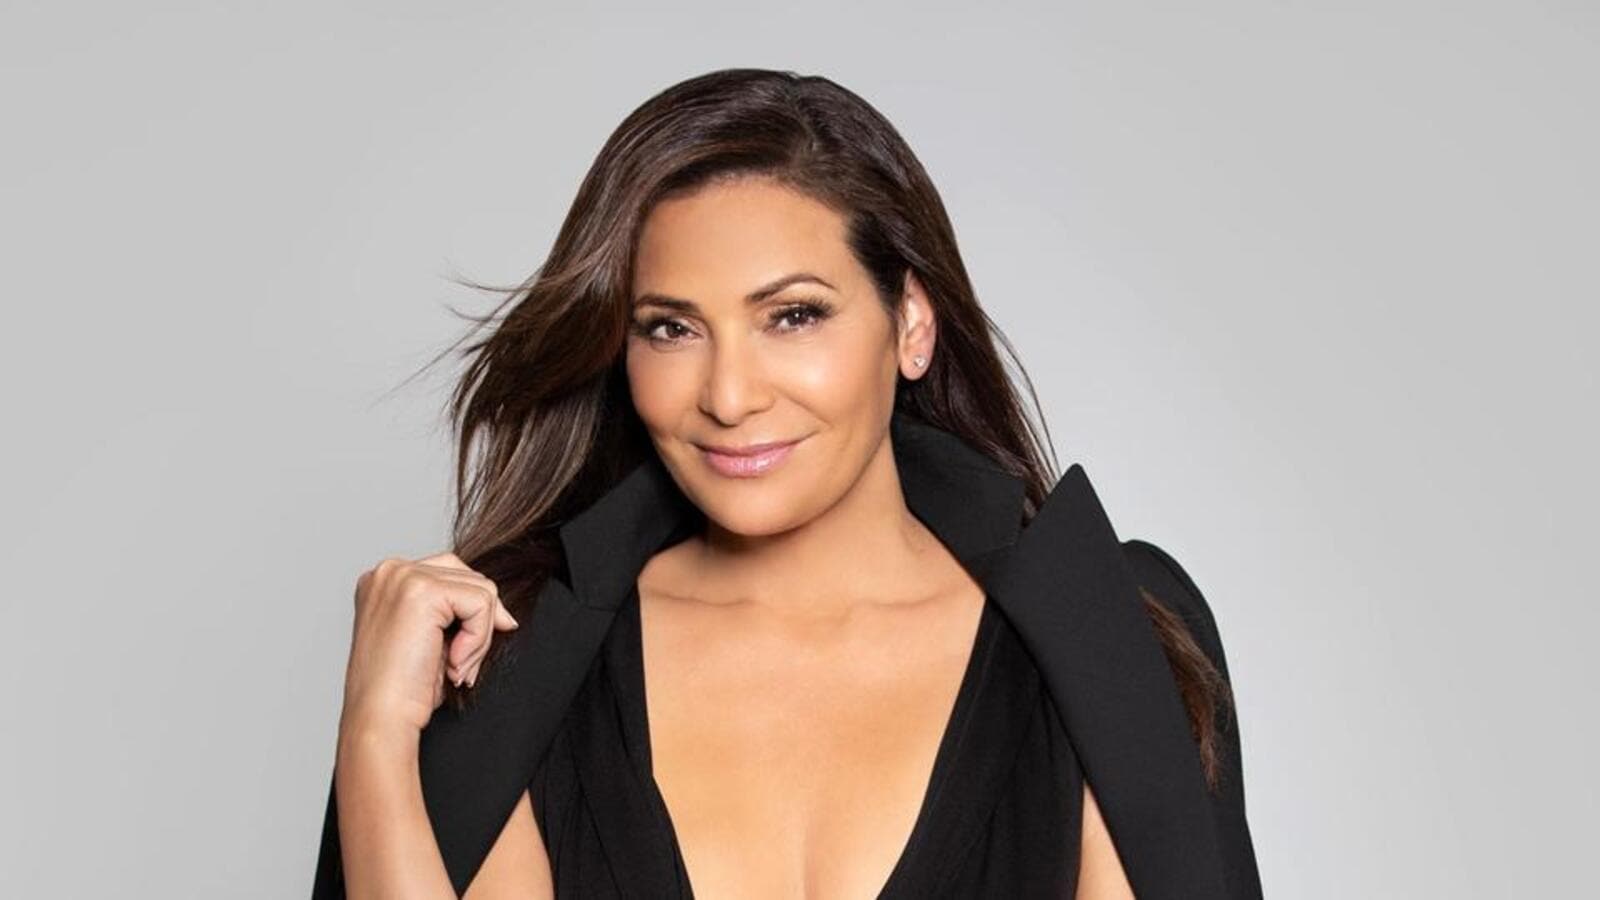 Constance Marie: Back in the day, things were worse for females in the industry